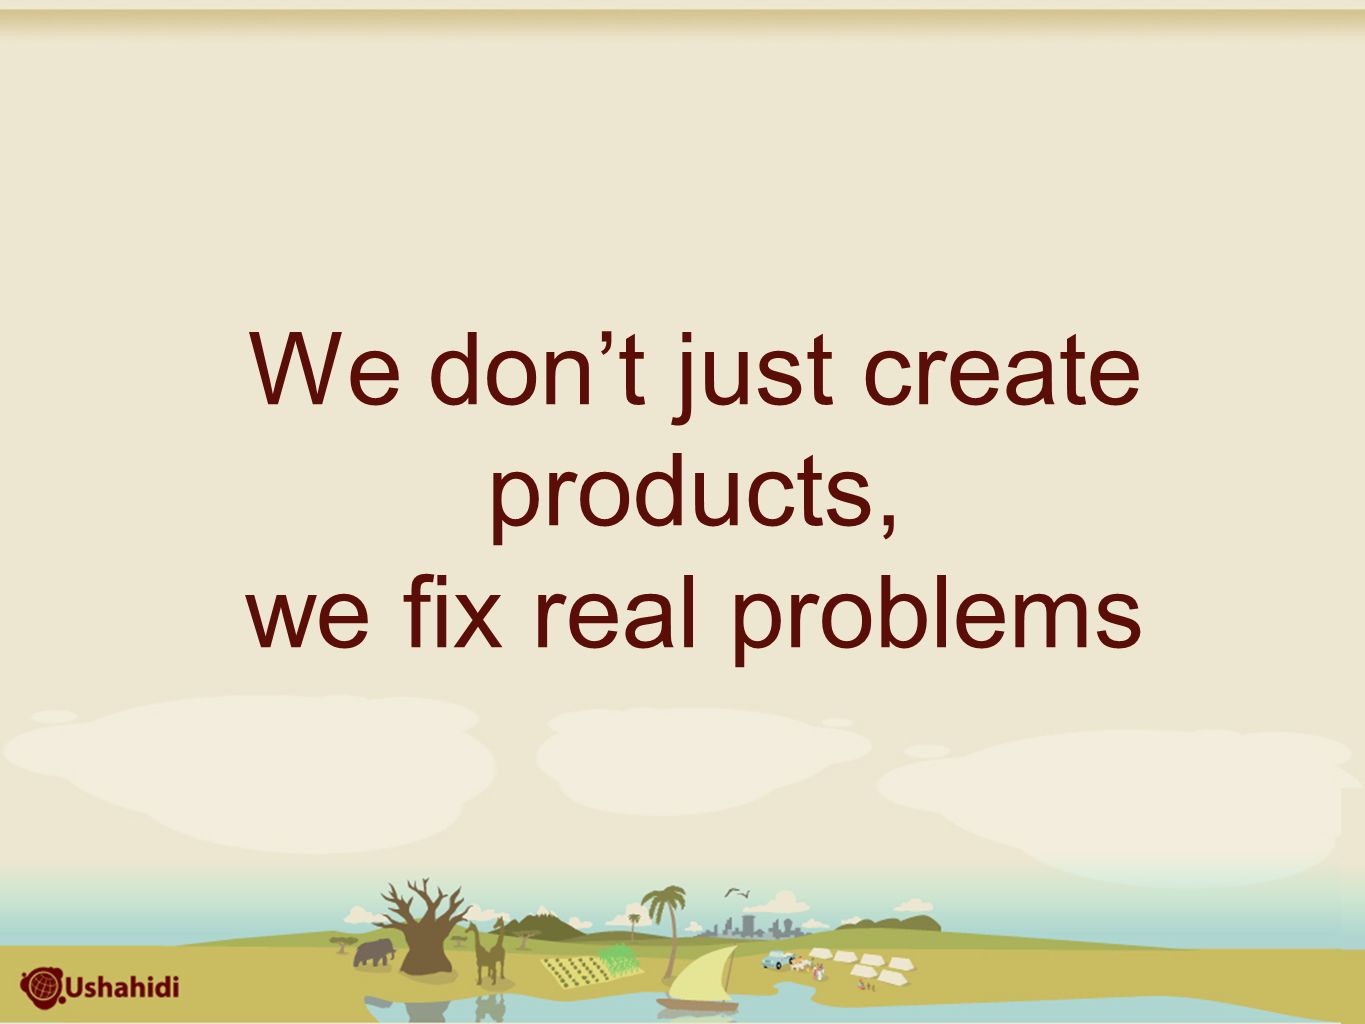 We don’t just create products, we fix real problems